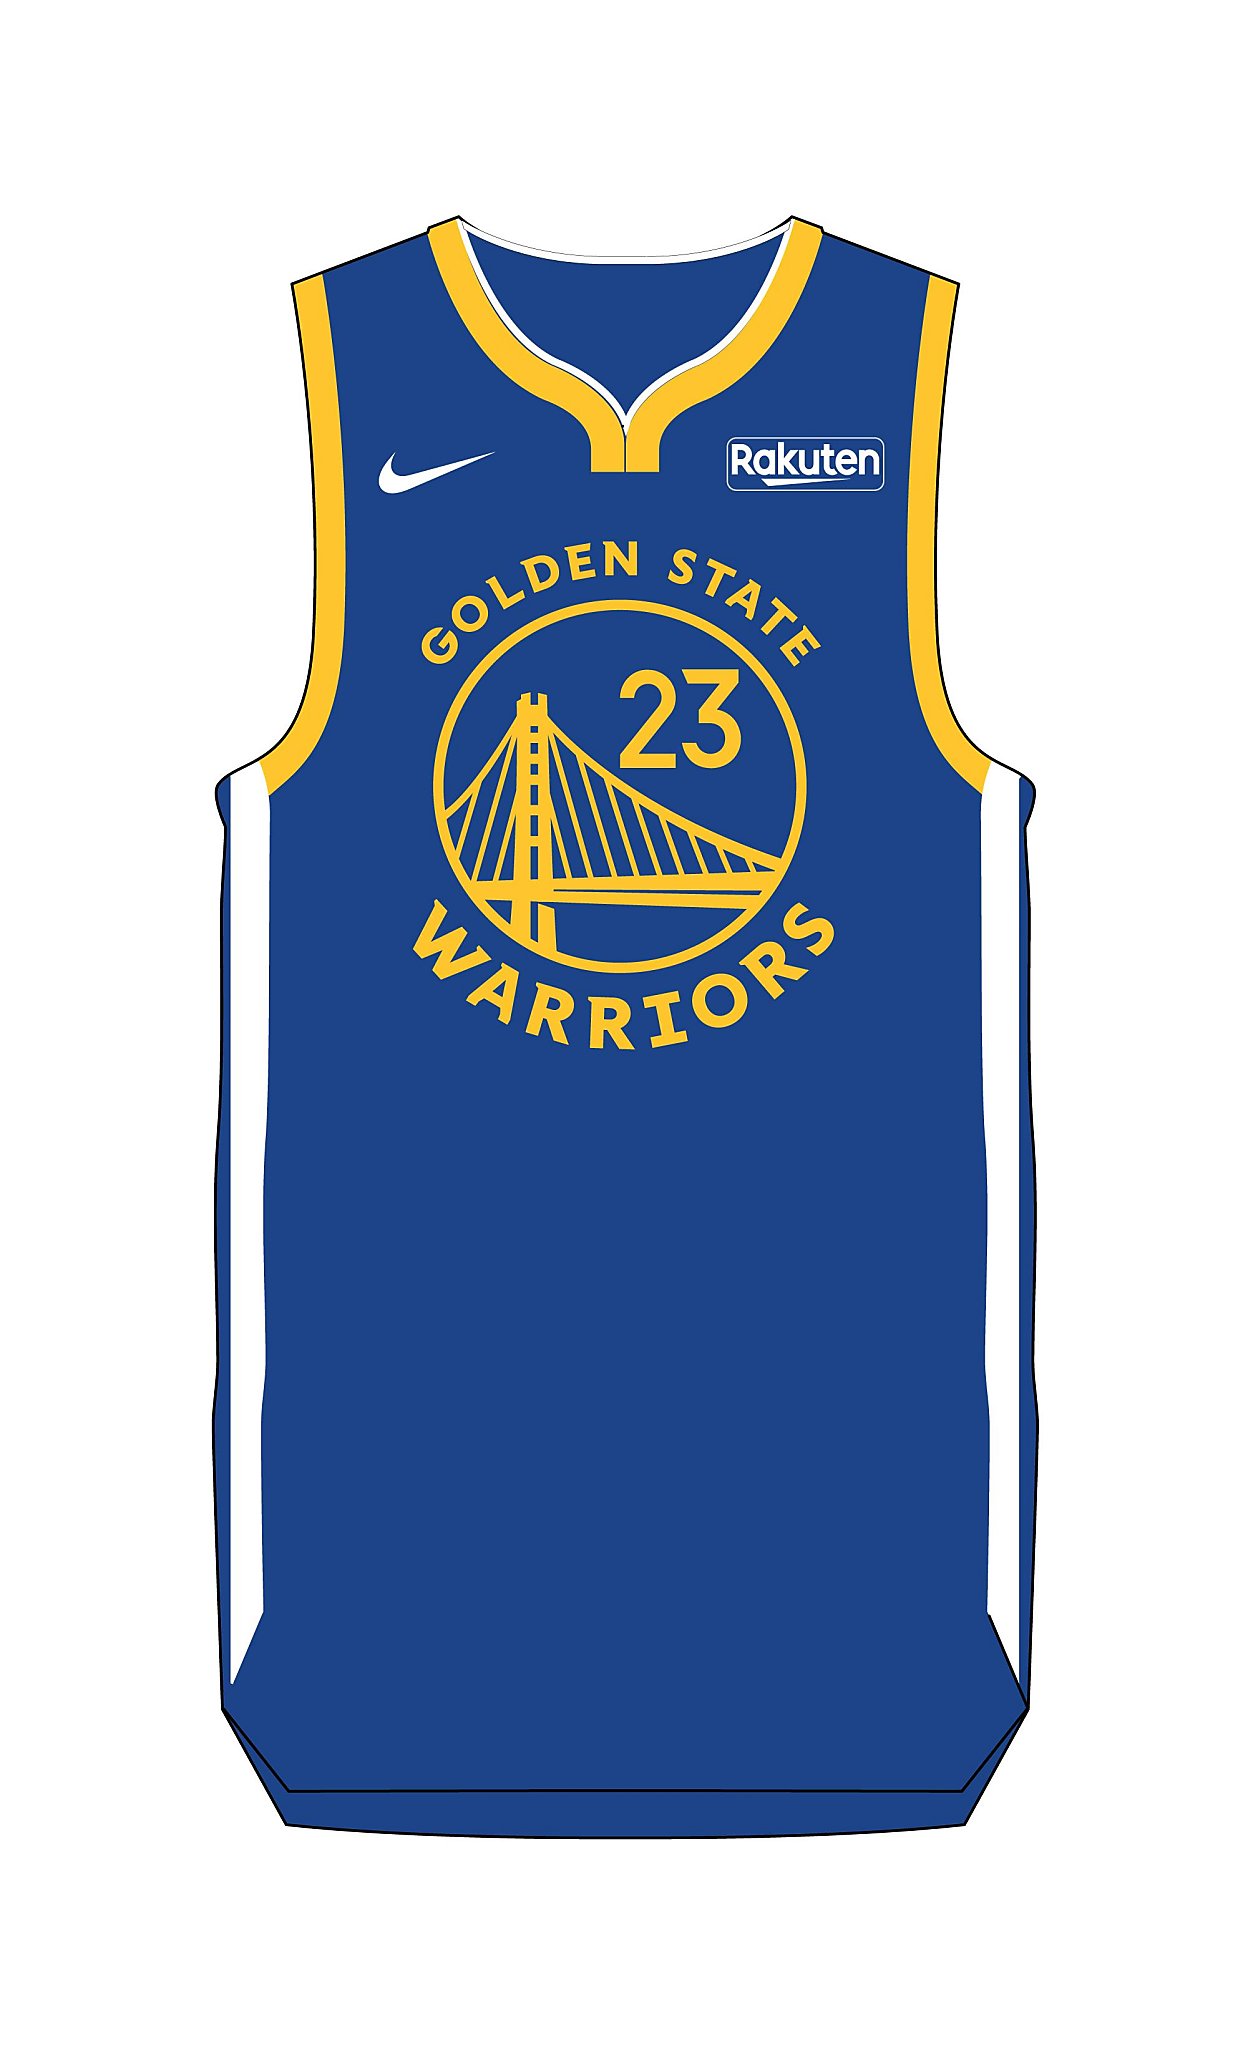 golden state old jerseys